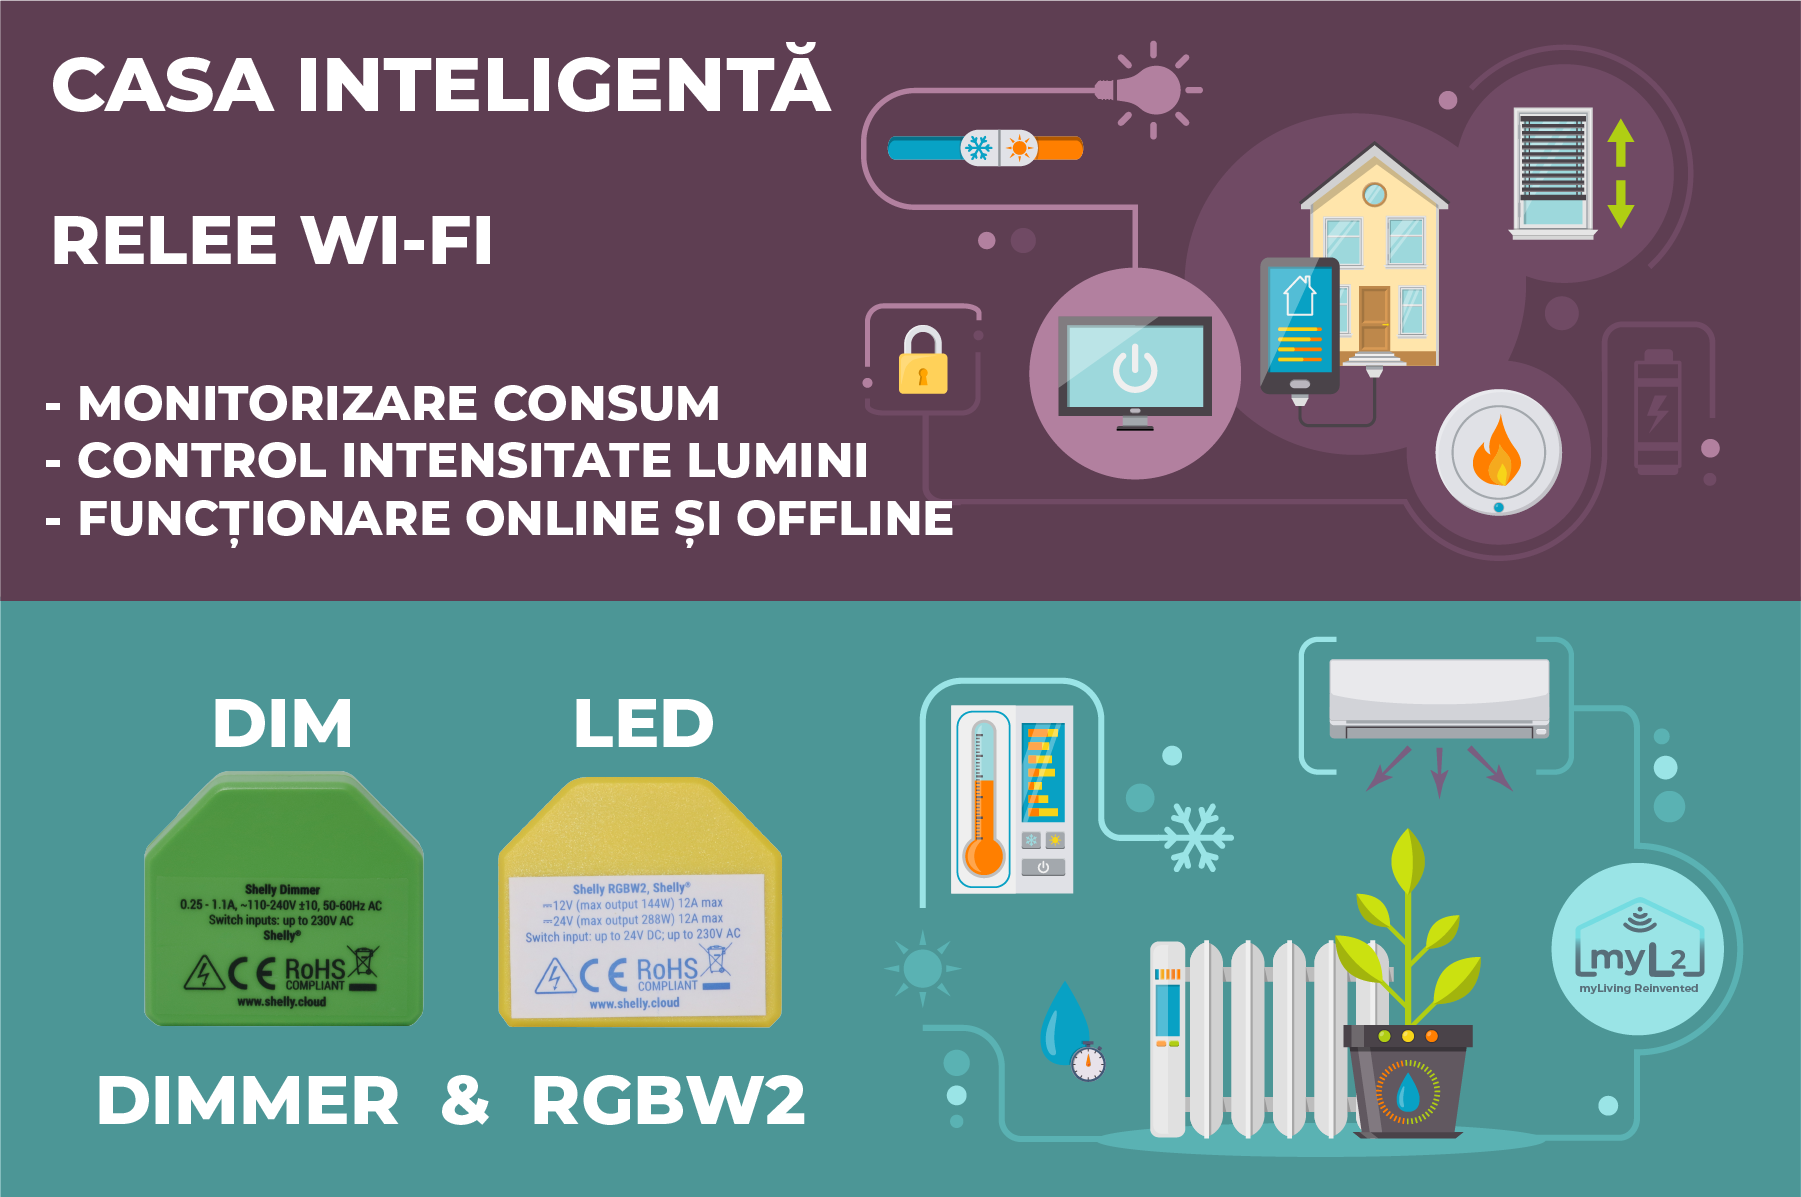 Shelly Dimmer si Shelly RGBW2 – Relee Smart Wi-Fi